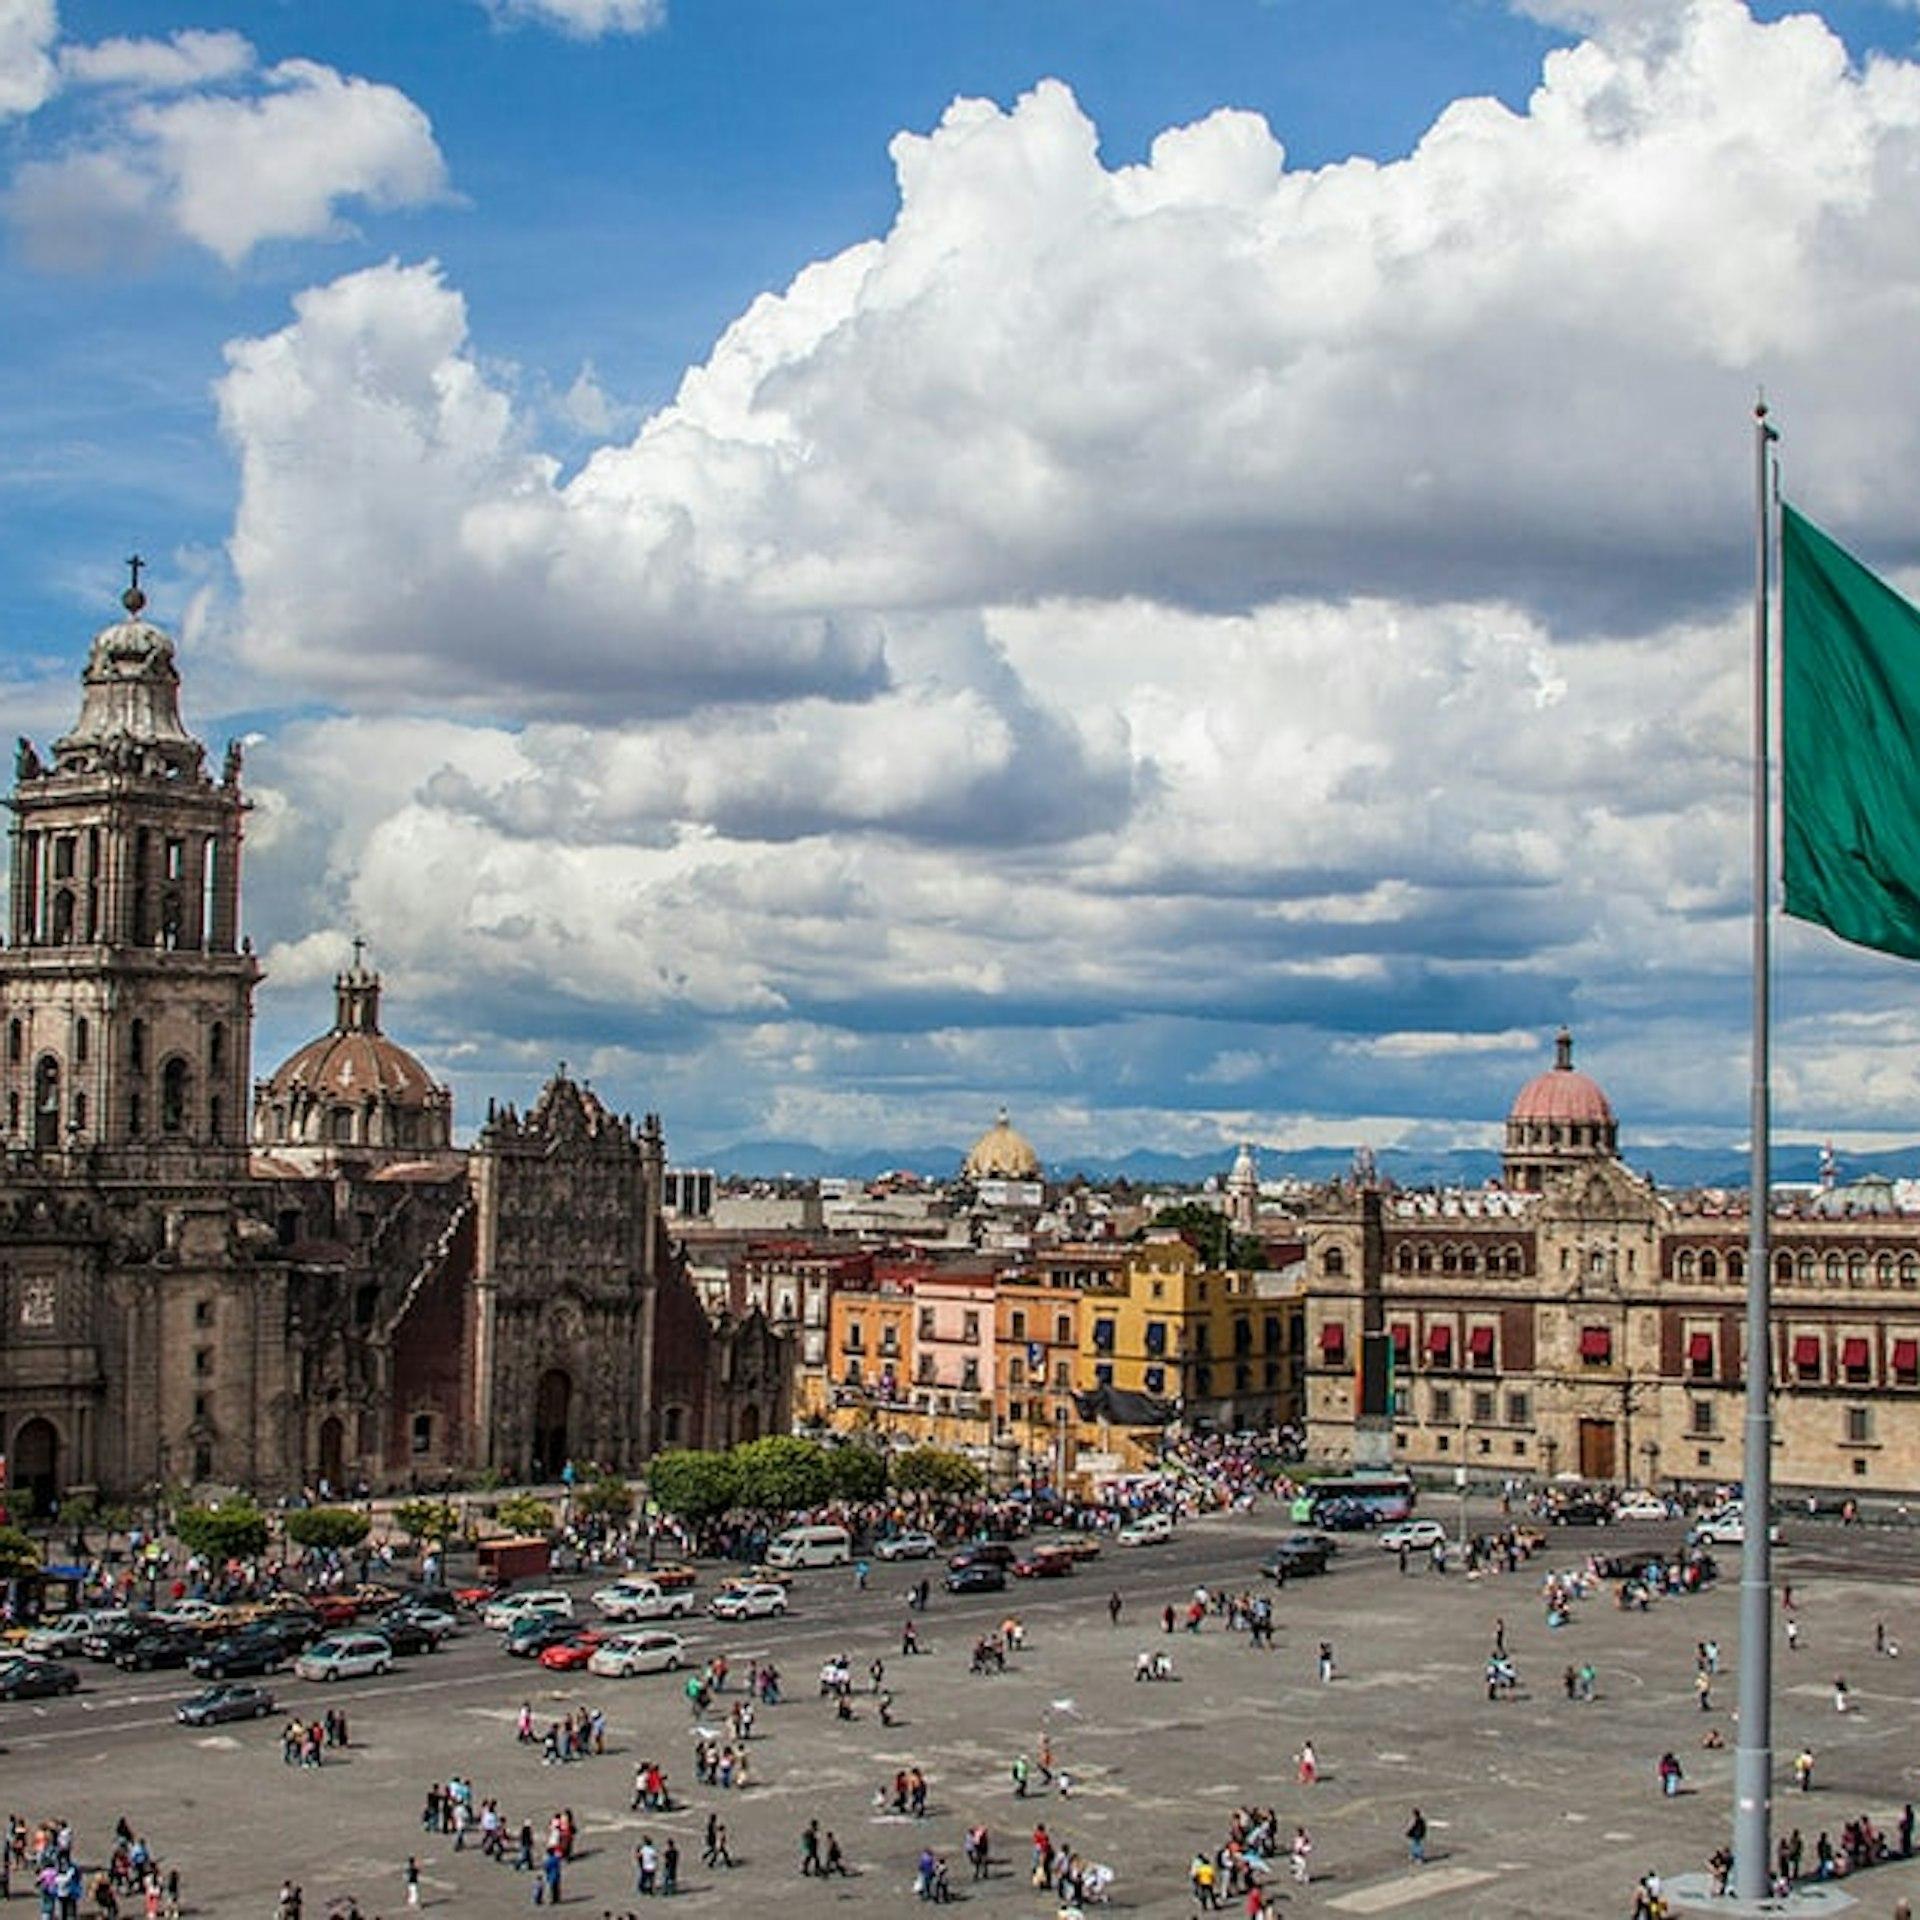 Get the latest news and updates on e-invoicing, e-ordering, e-archiving and indirect tax regulatory requirements for Mexico.